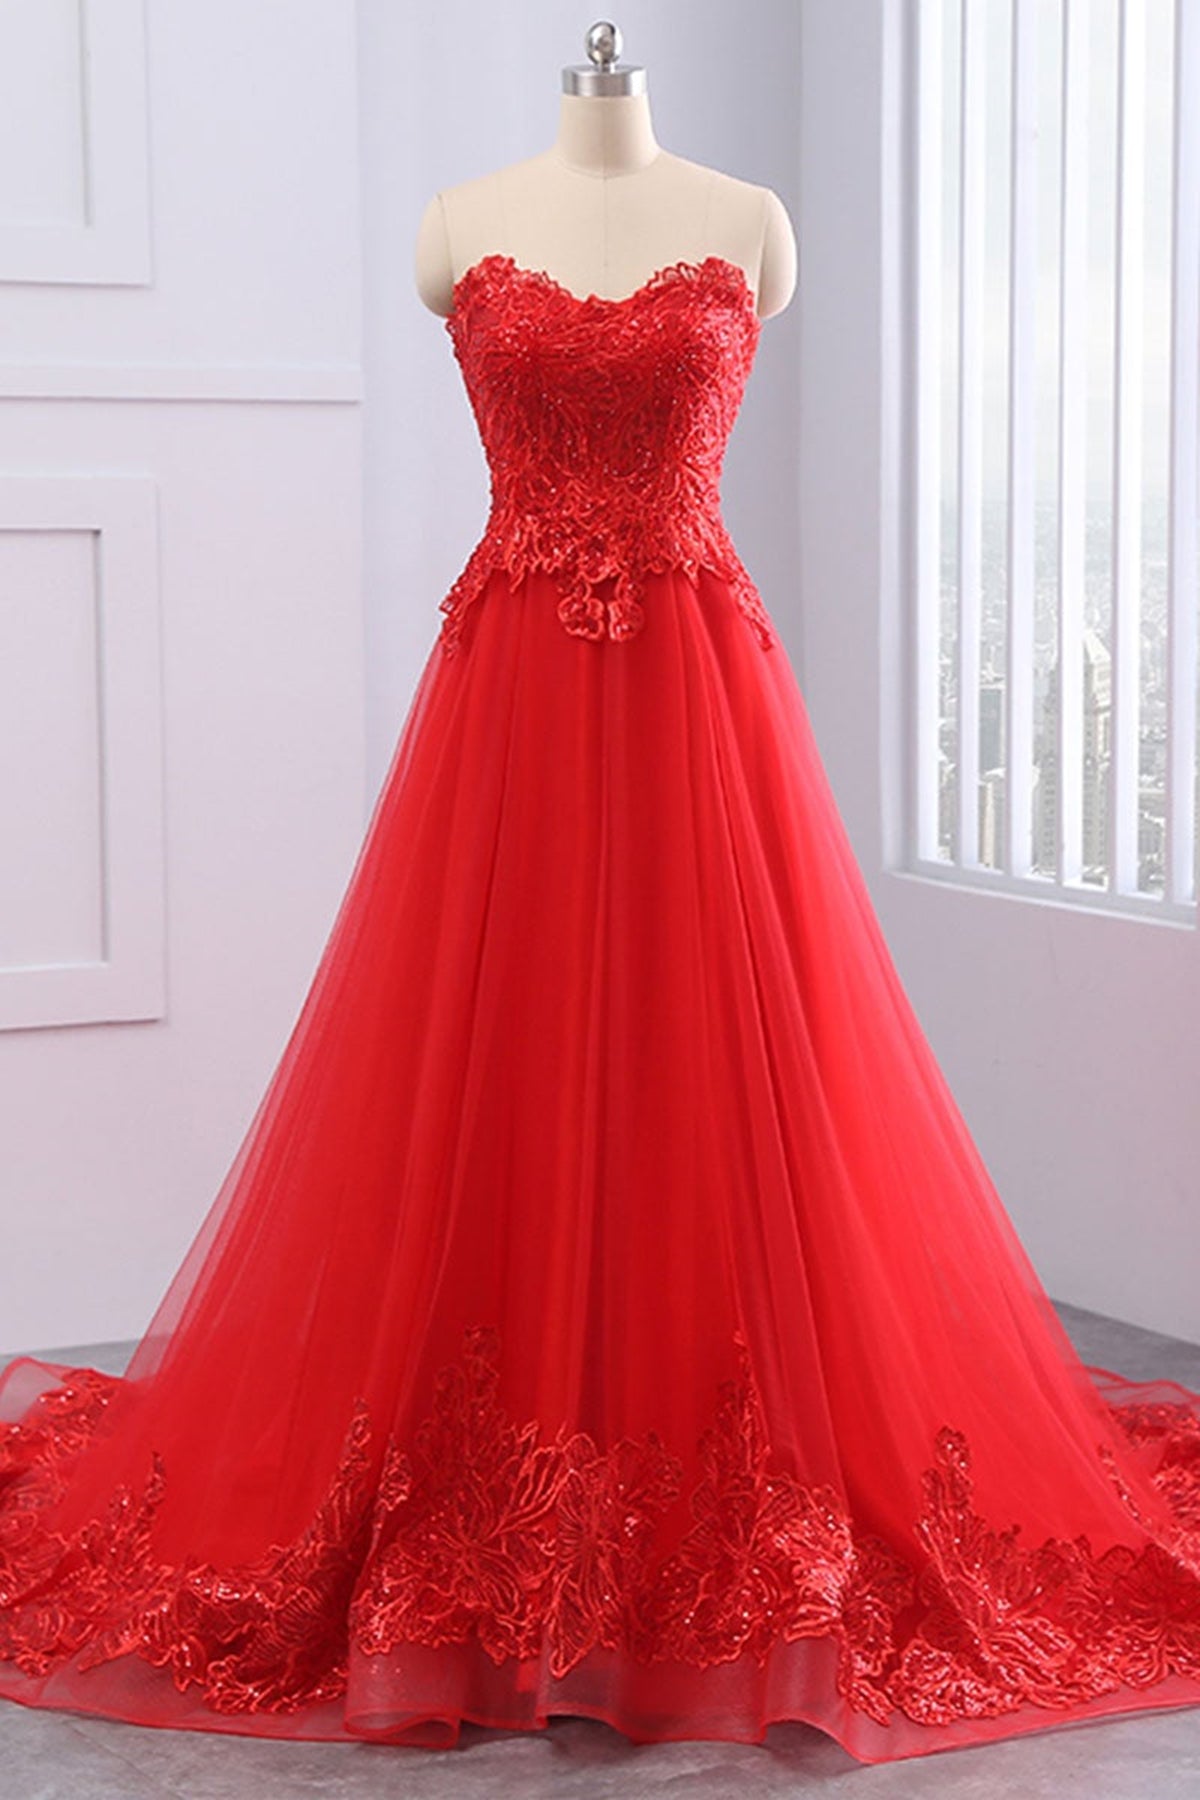 Sweetheart Neck Red/Light Blue Lace Tulle Long Prom Dresses, Strapless Red/Blue Lace Formal Evening Dresses